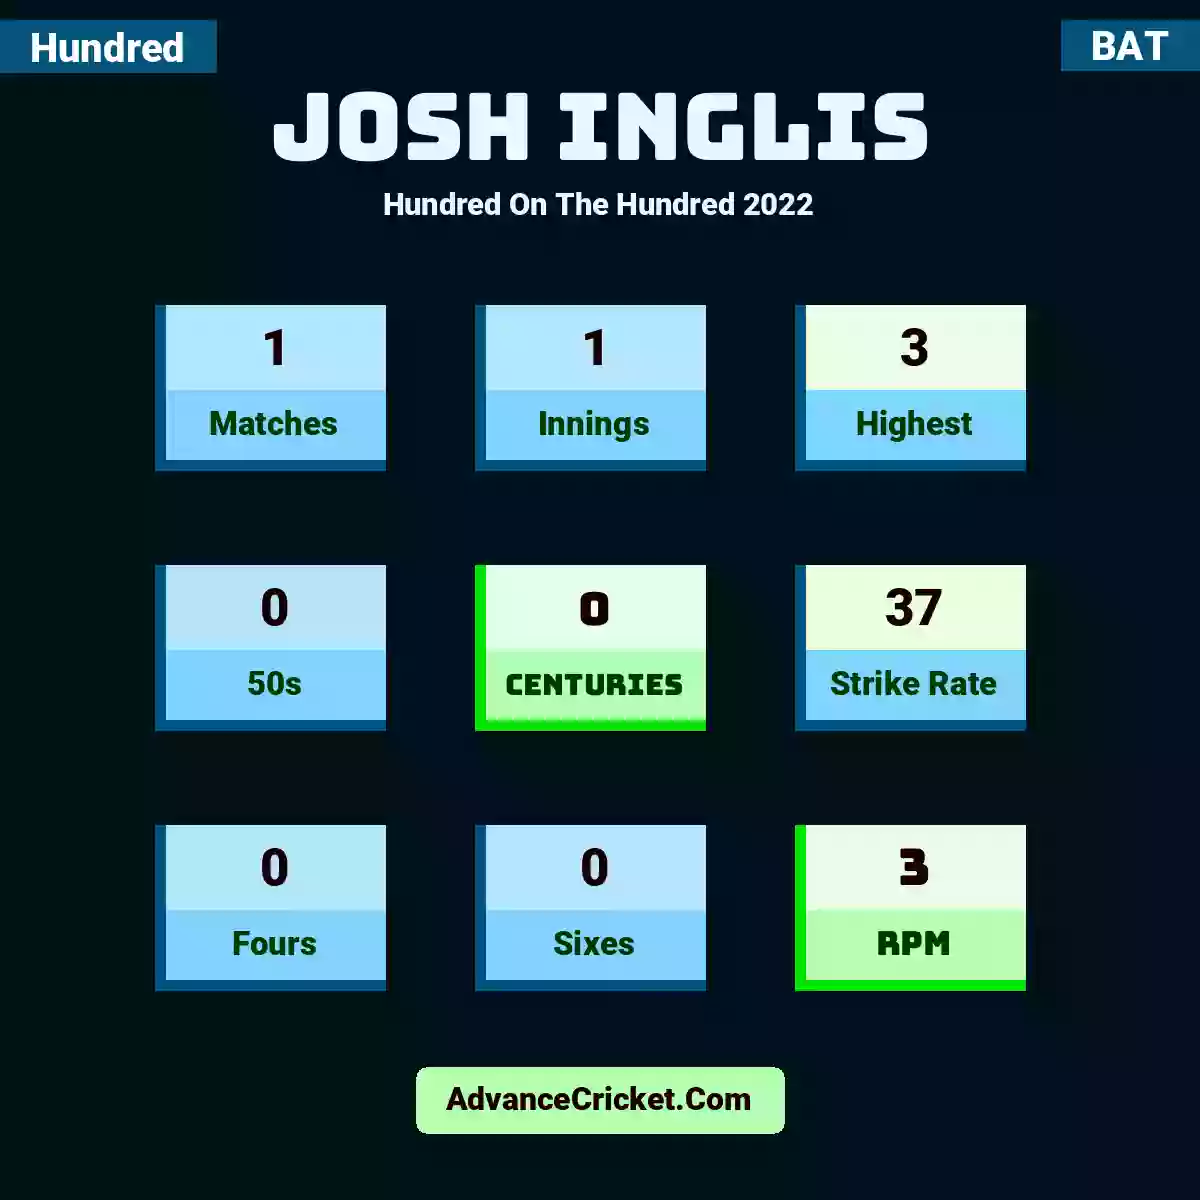 Josh Inglis Hundred  On The Hundred 2022, Josh Inglis played 1 matches, scored 3 runs as highest, 0 half-centuries, and 0 centuries, with a strike rate of 37. J.Inglis hit 0 fours and 0 sixes, with an RPM of 3.